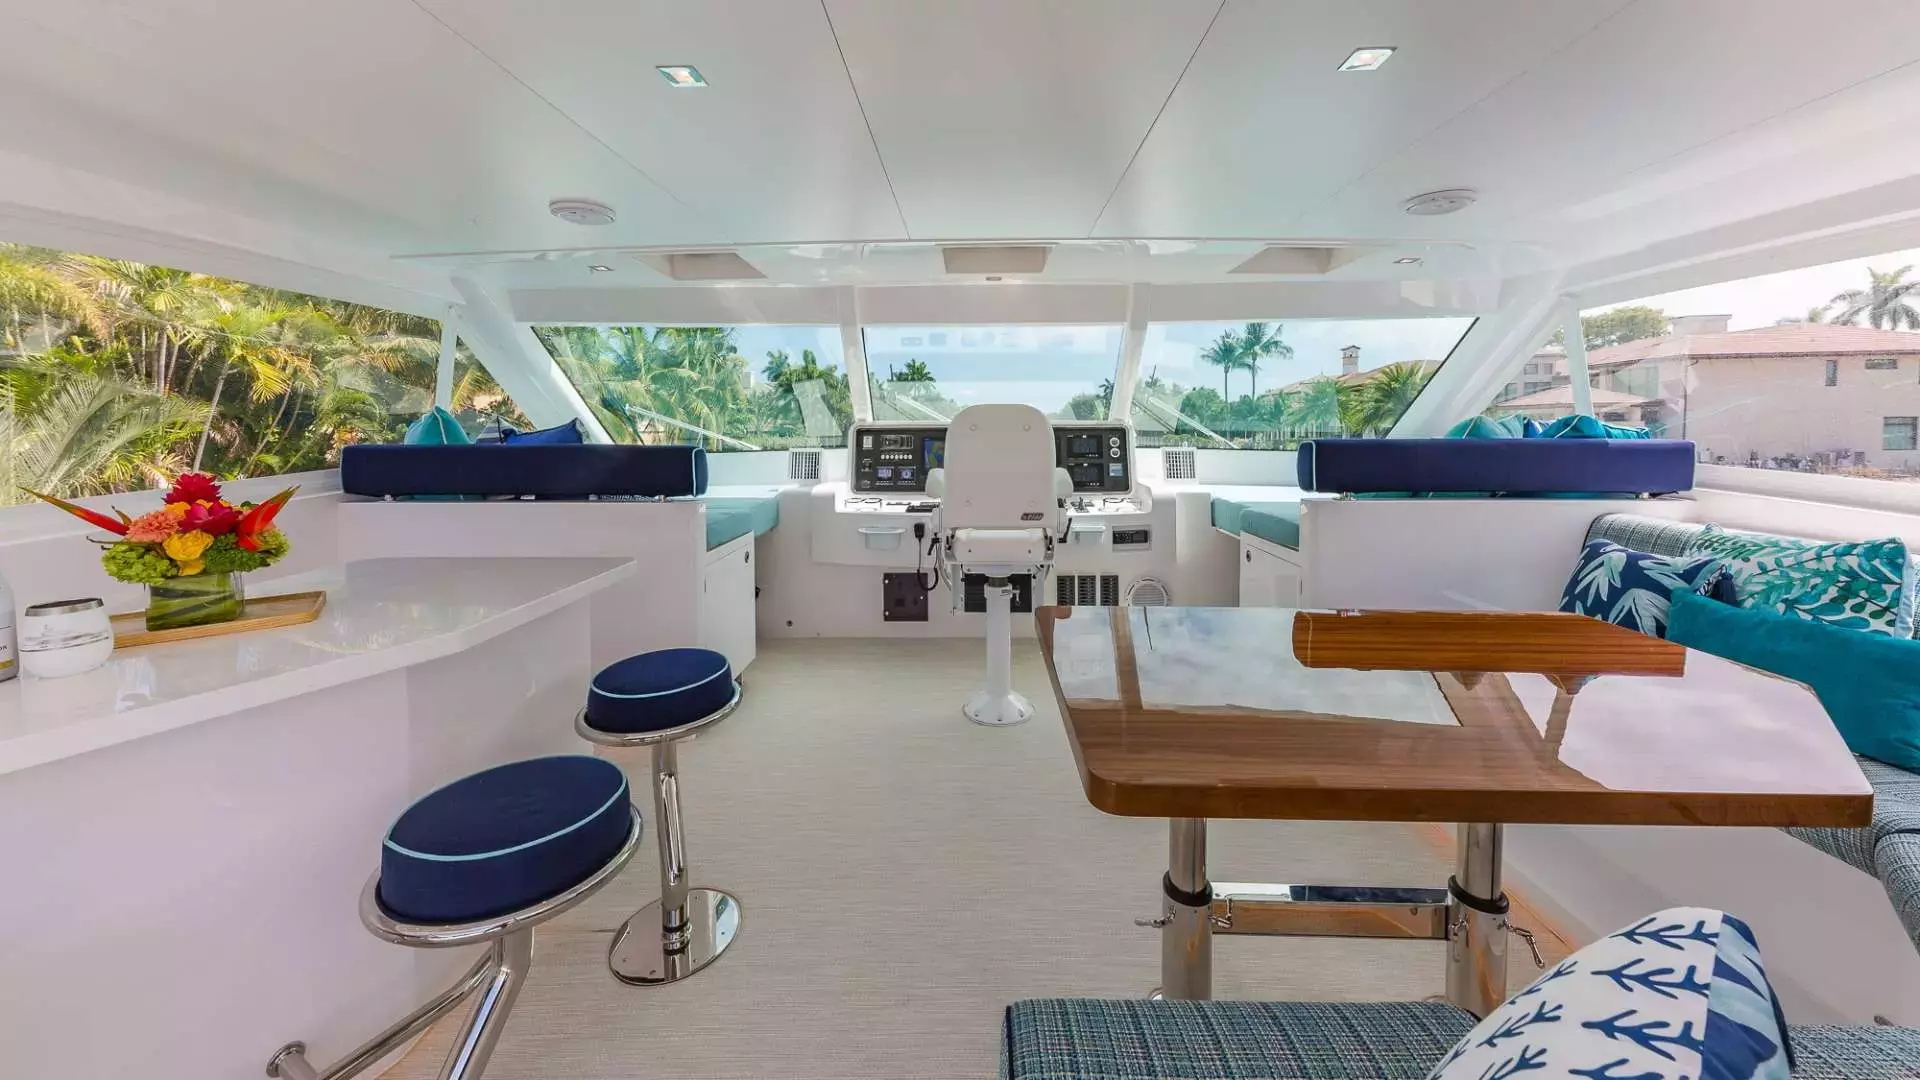 Mucho Gusto by Horizon - Top rates for a Rental of a private Power Catamaran in Bahamas